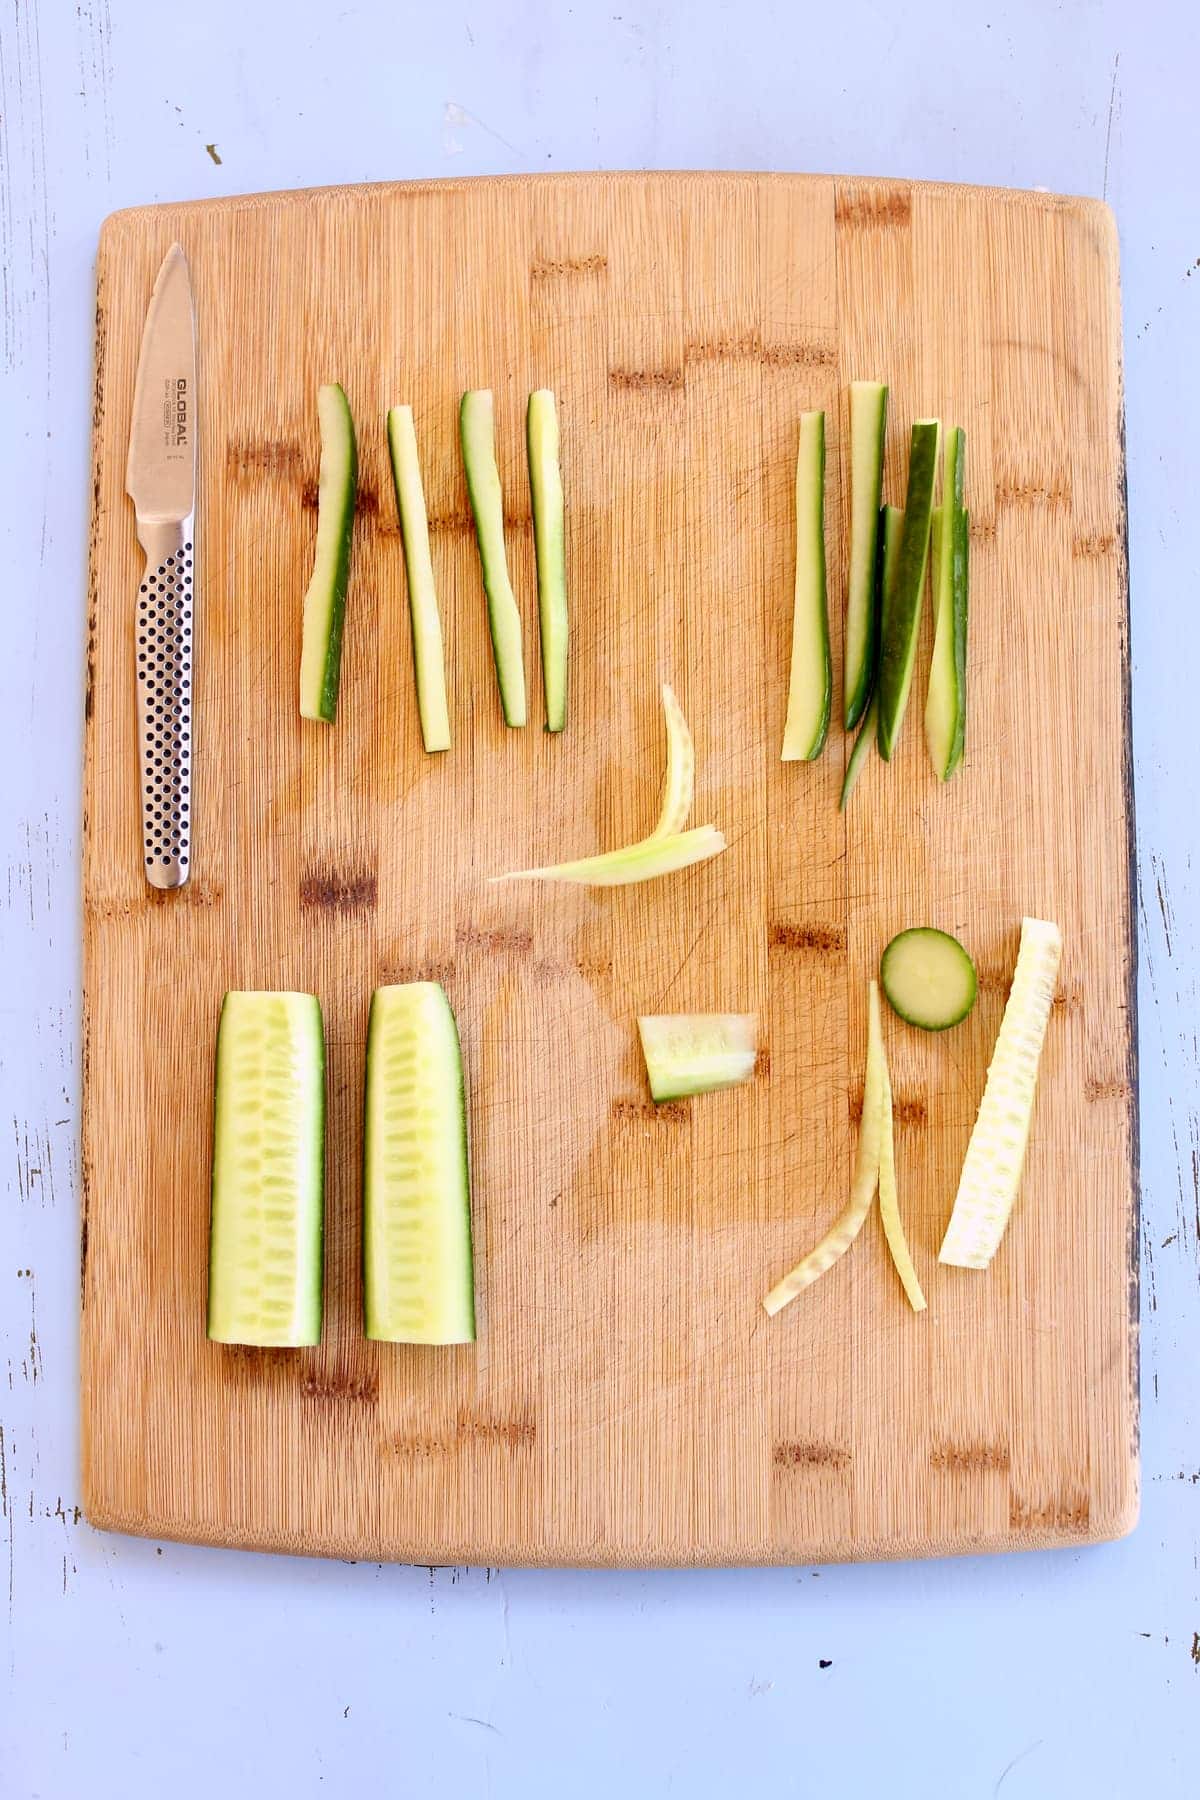 a process food shot showing how to cut vegetables in a recipe.